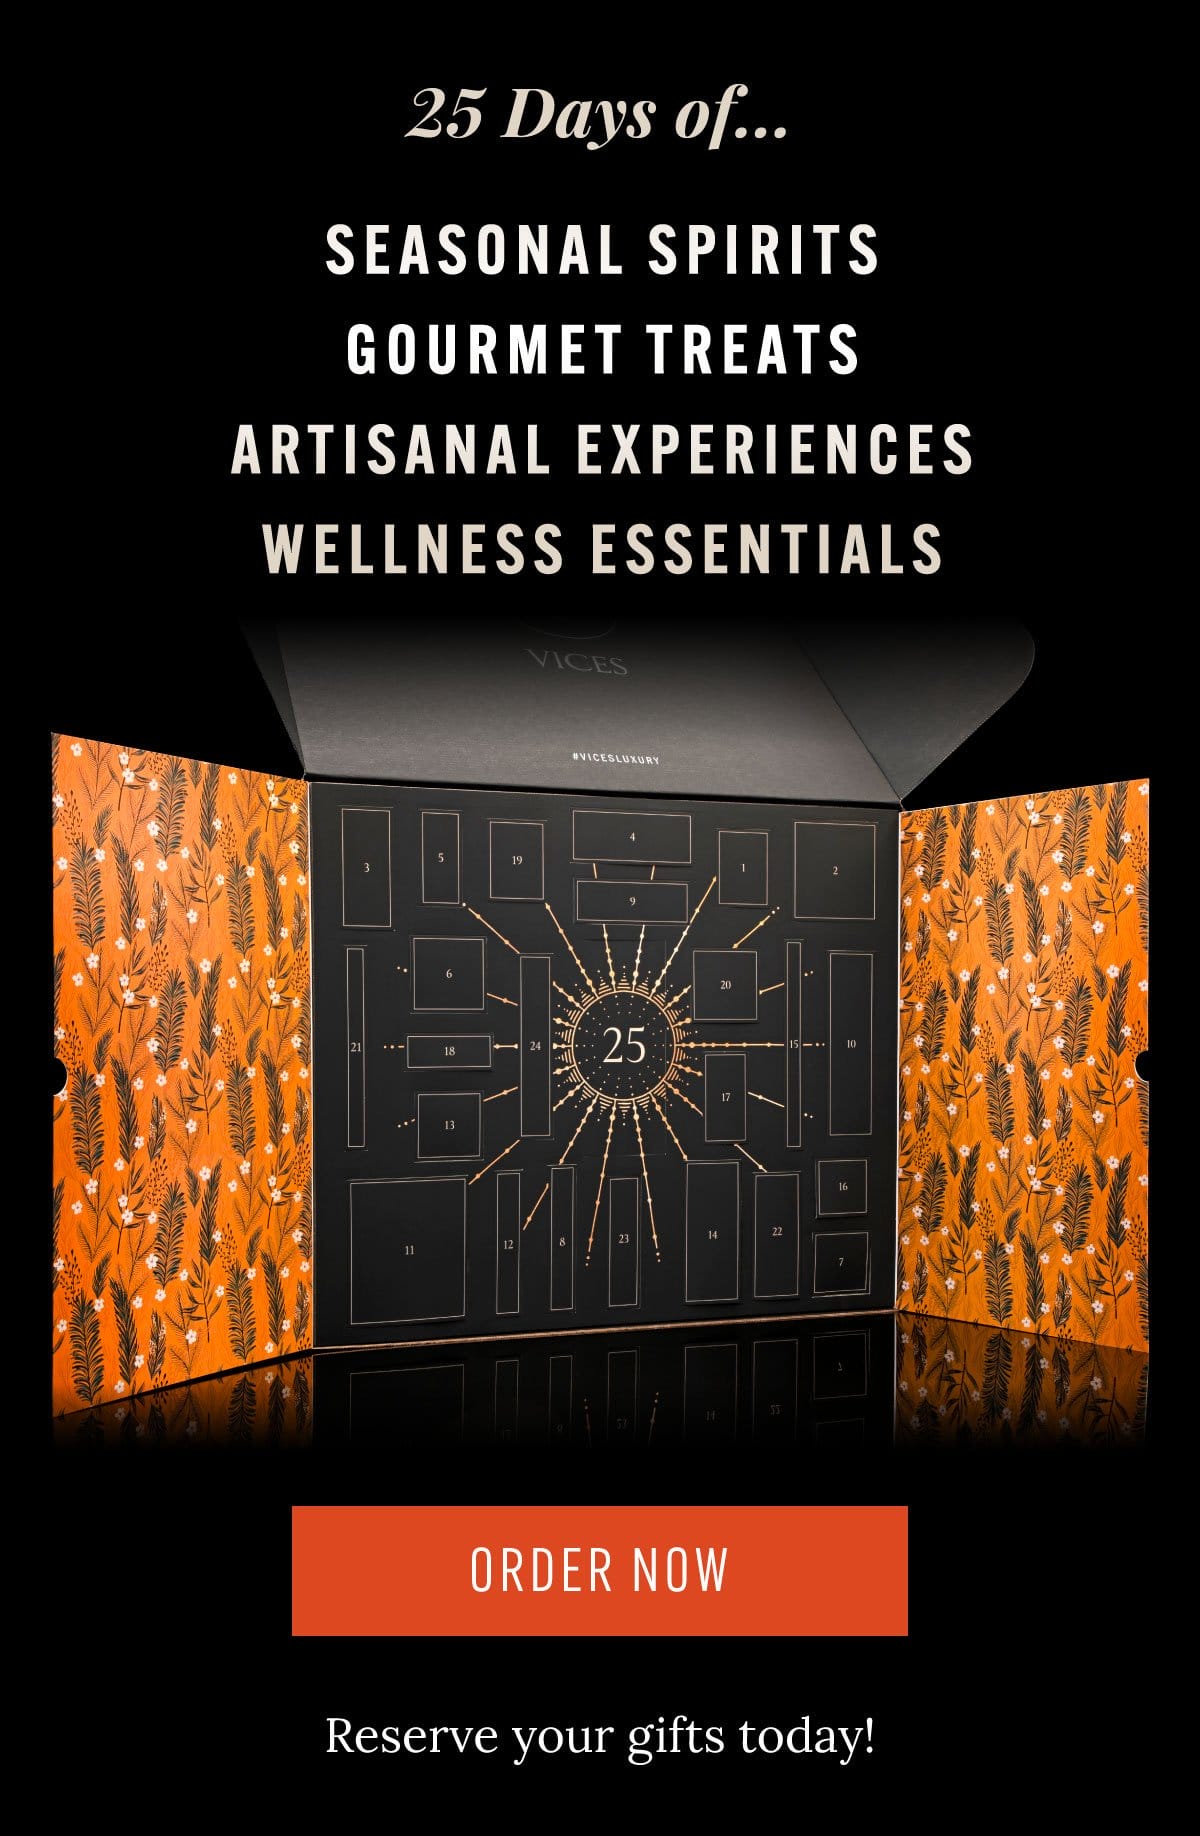 25 Days of Seasonal spirits, gourmet treats, artisanal experiences, wellness essentials. Reserve your gifts today!